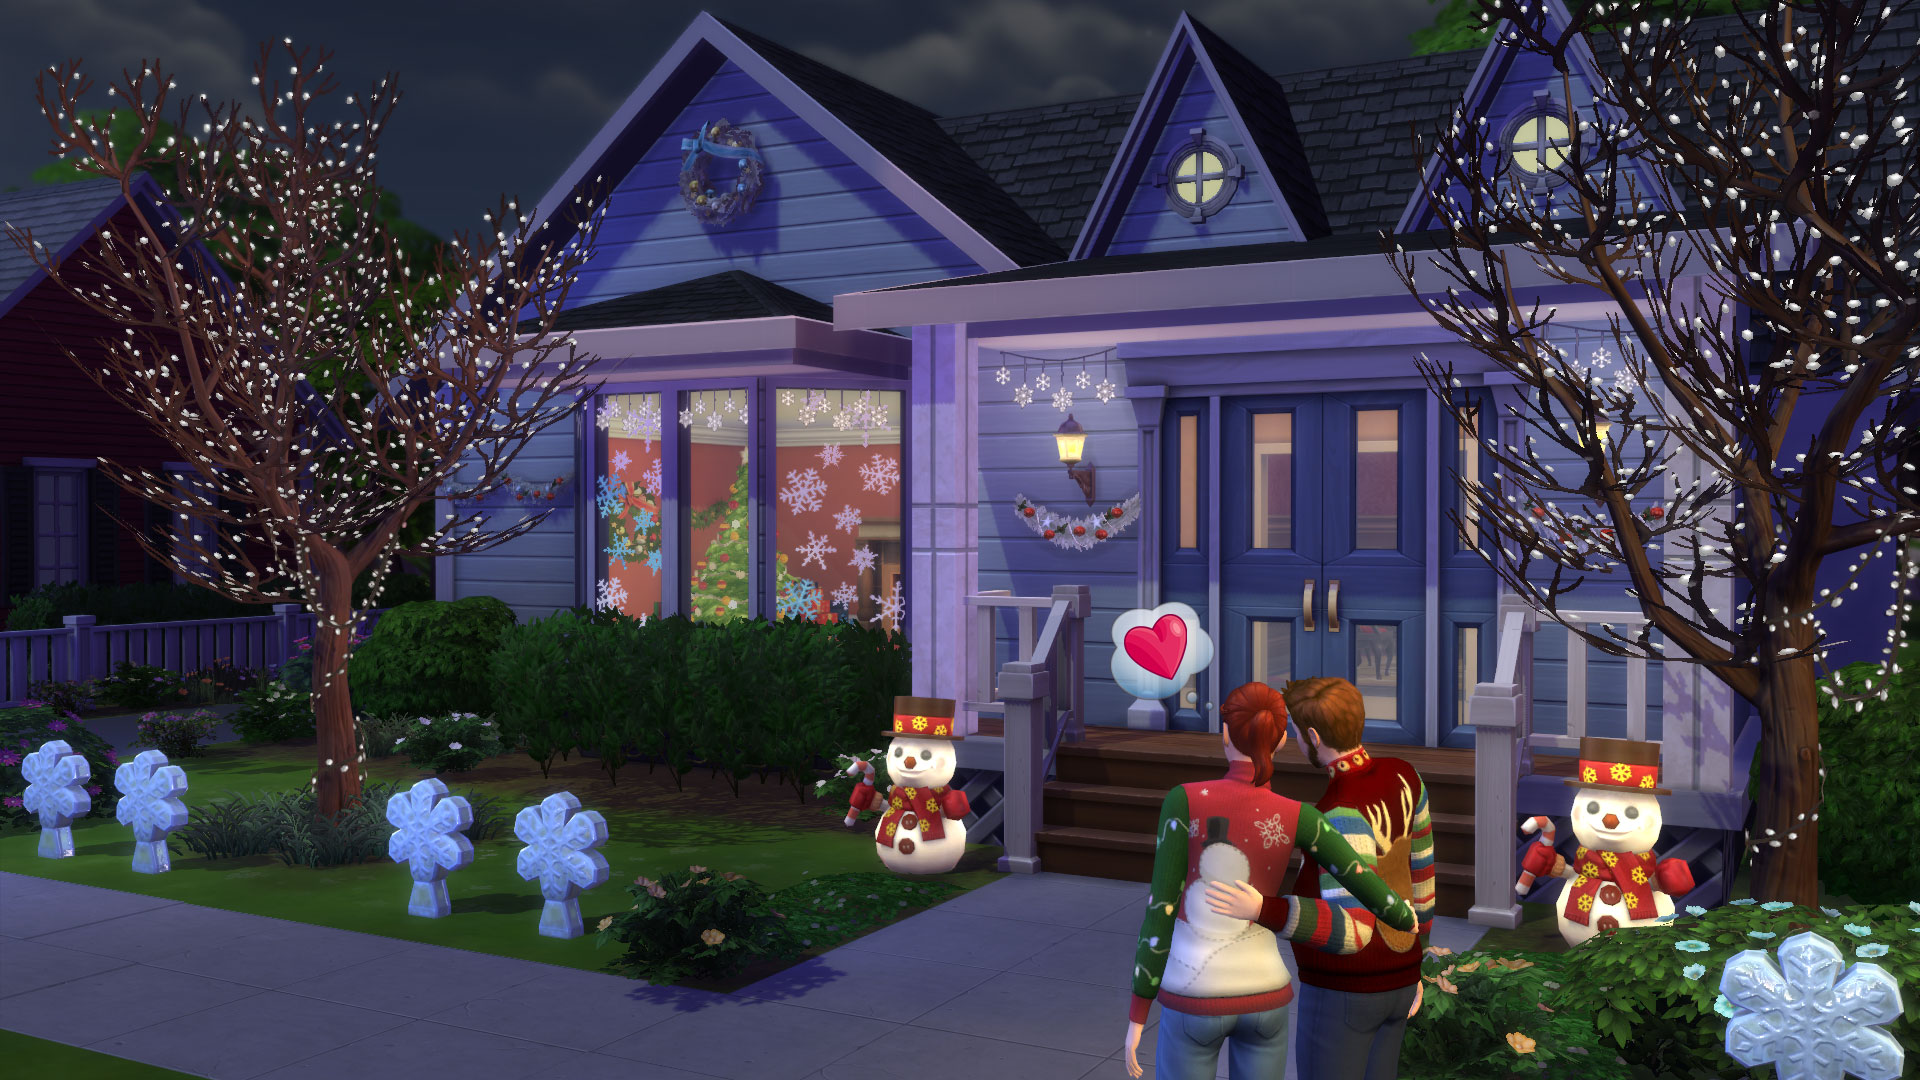 TS4_638_HOLIDAY_PACK_01_001a.jpg